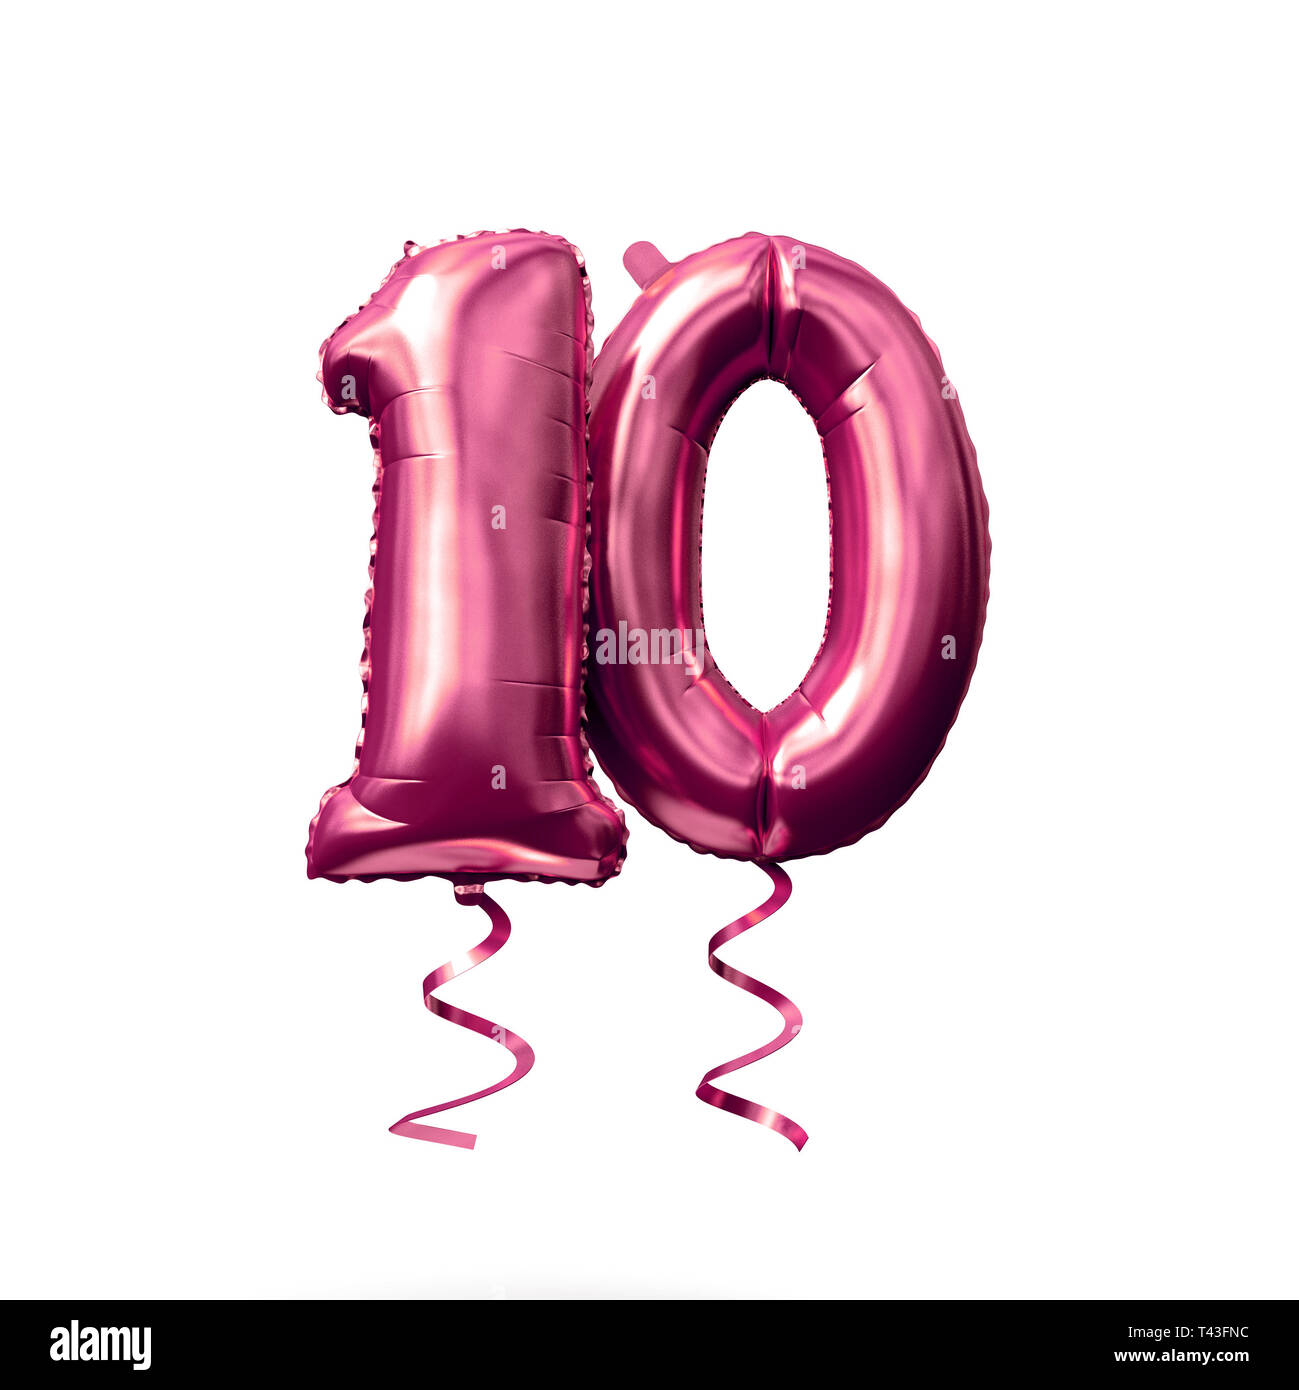 Number 10 rose gold helium balloon isolated on a white background. 3D Render Stock Photo